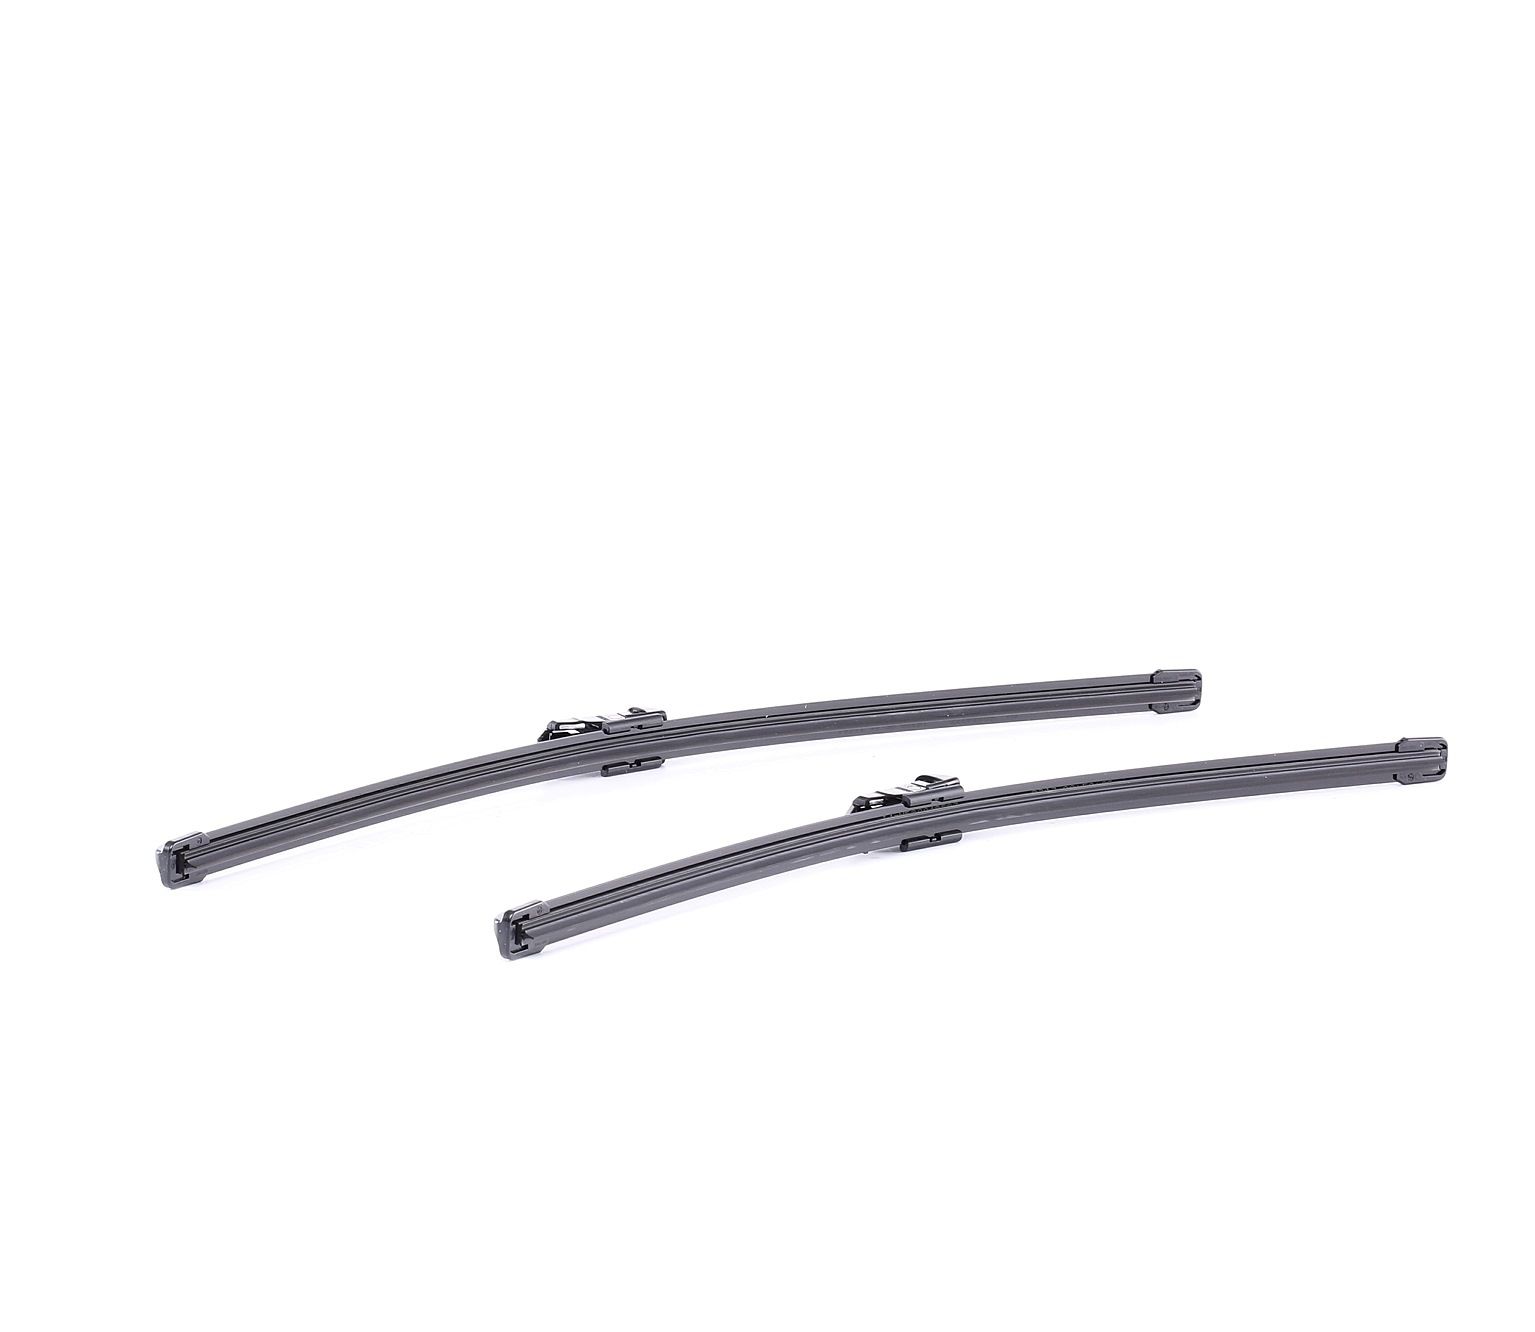 SWF VisioFlex 119301 Wiper blade 530, 480 mm Front, Beam, with spoiler, for left-hand drive vehicles